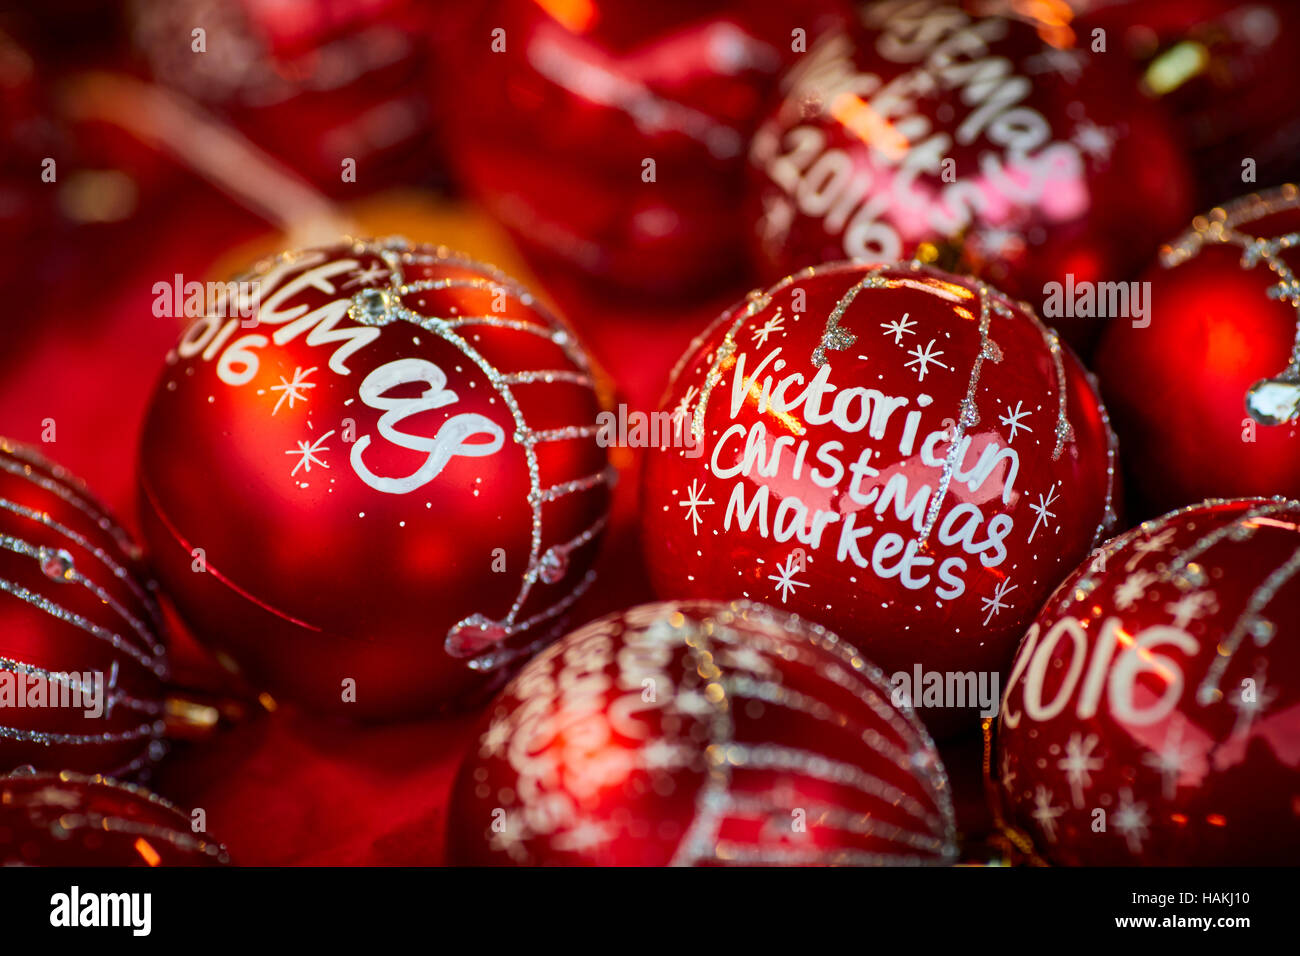 Manchester stalls christmas markets   christmas tree baubles close up face red gift  artisan traditional decorations victorian Christmas winter festiv Stock Photo